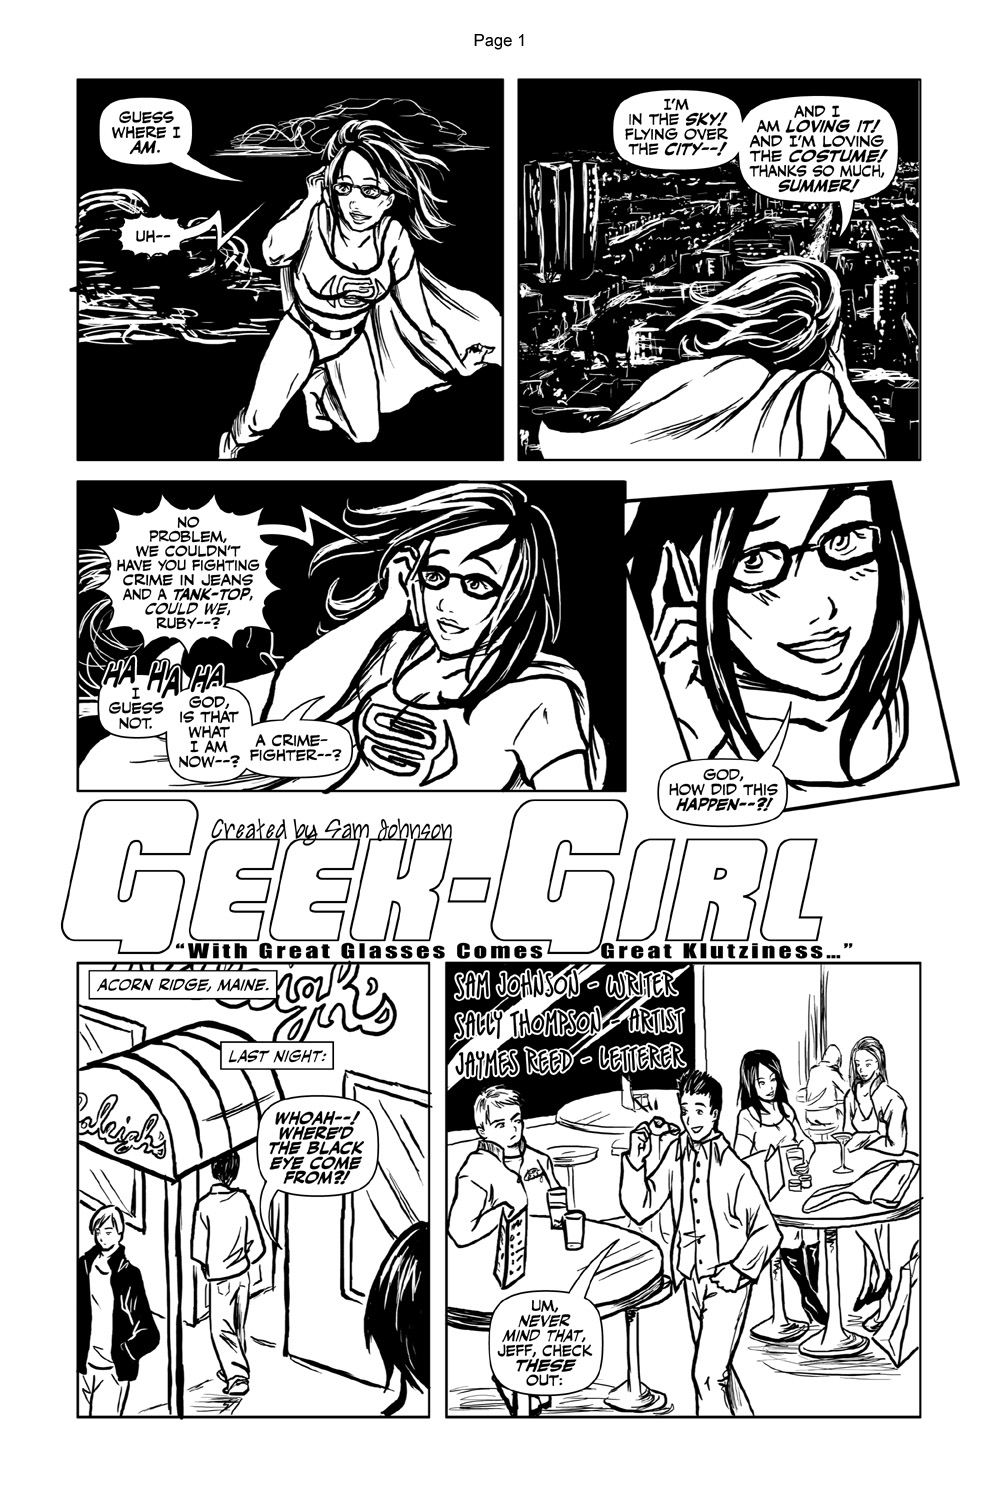 Page from Geek-Girl#0.